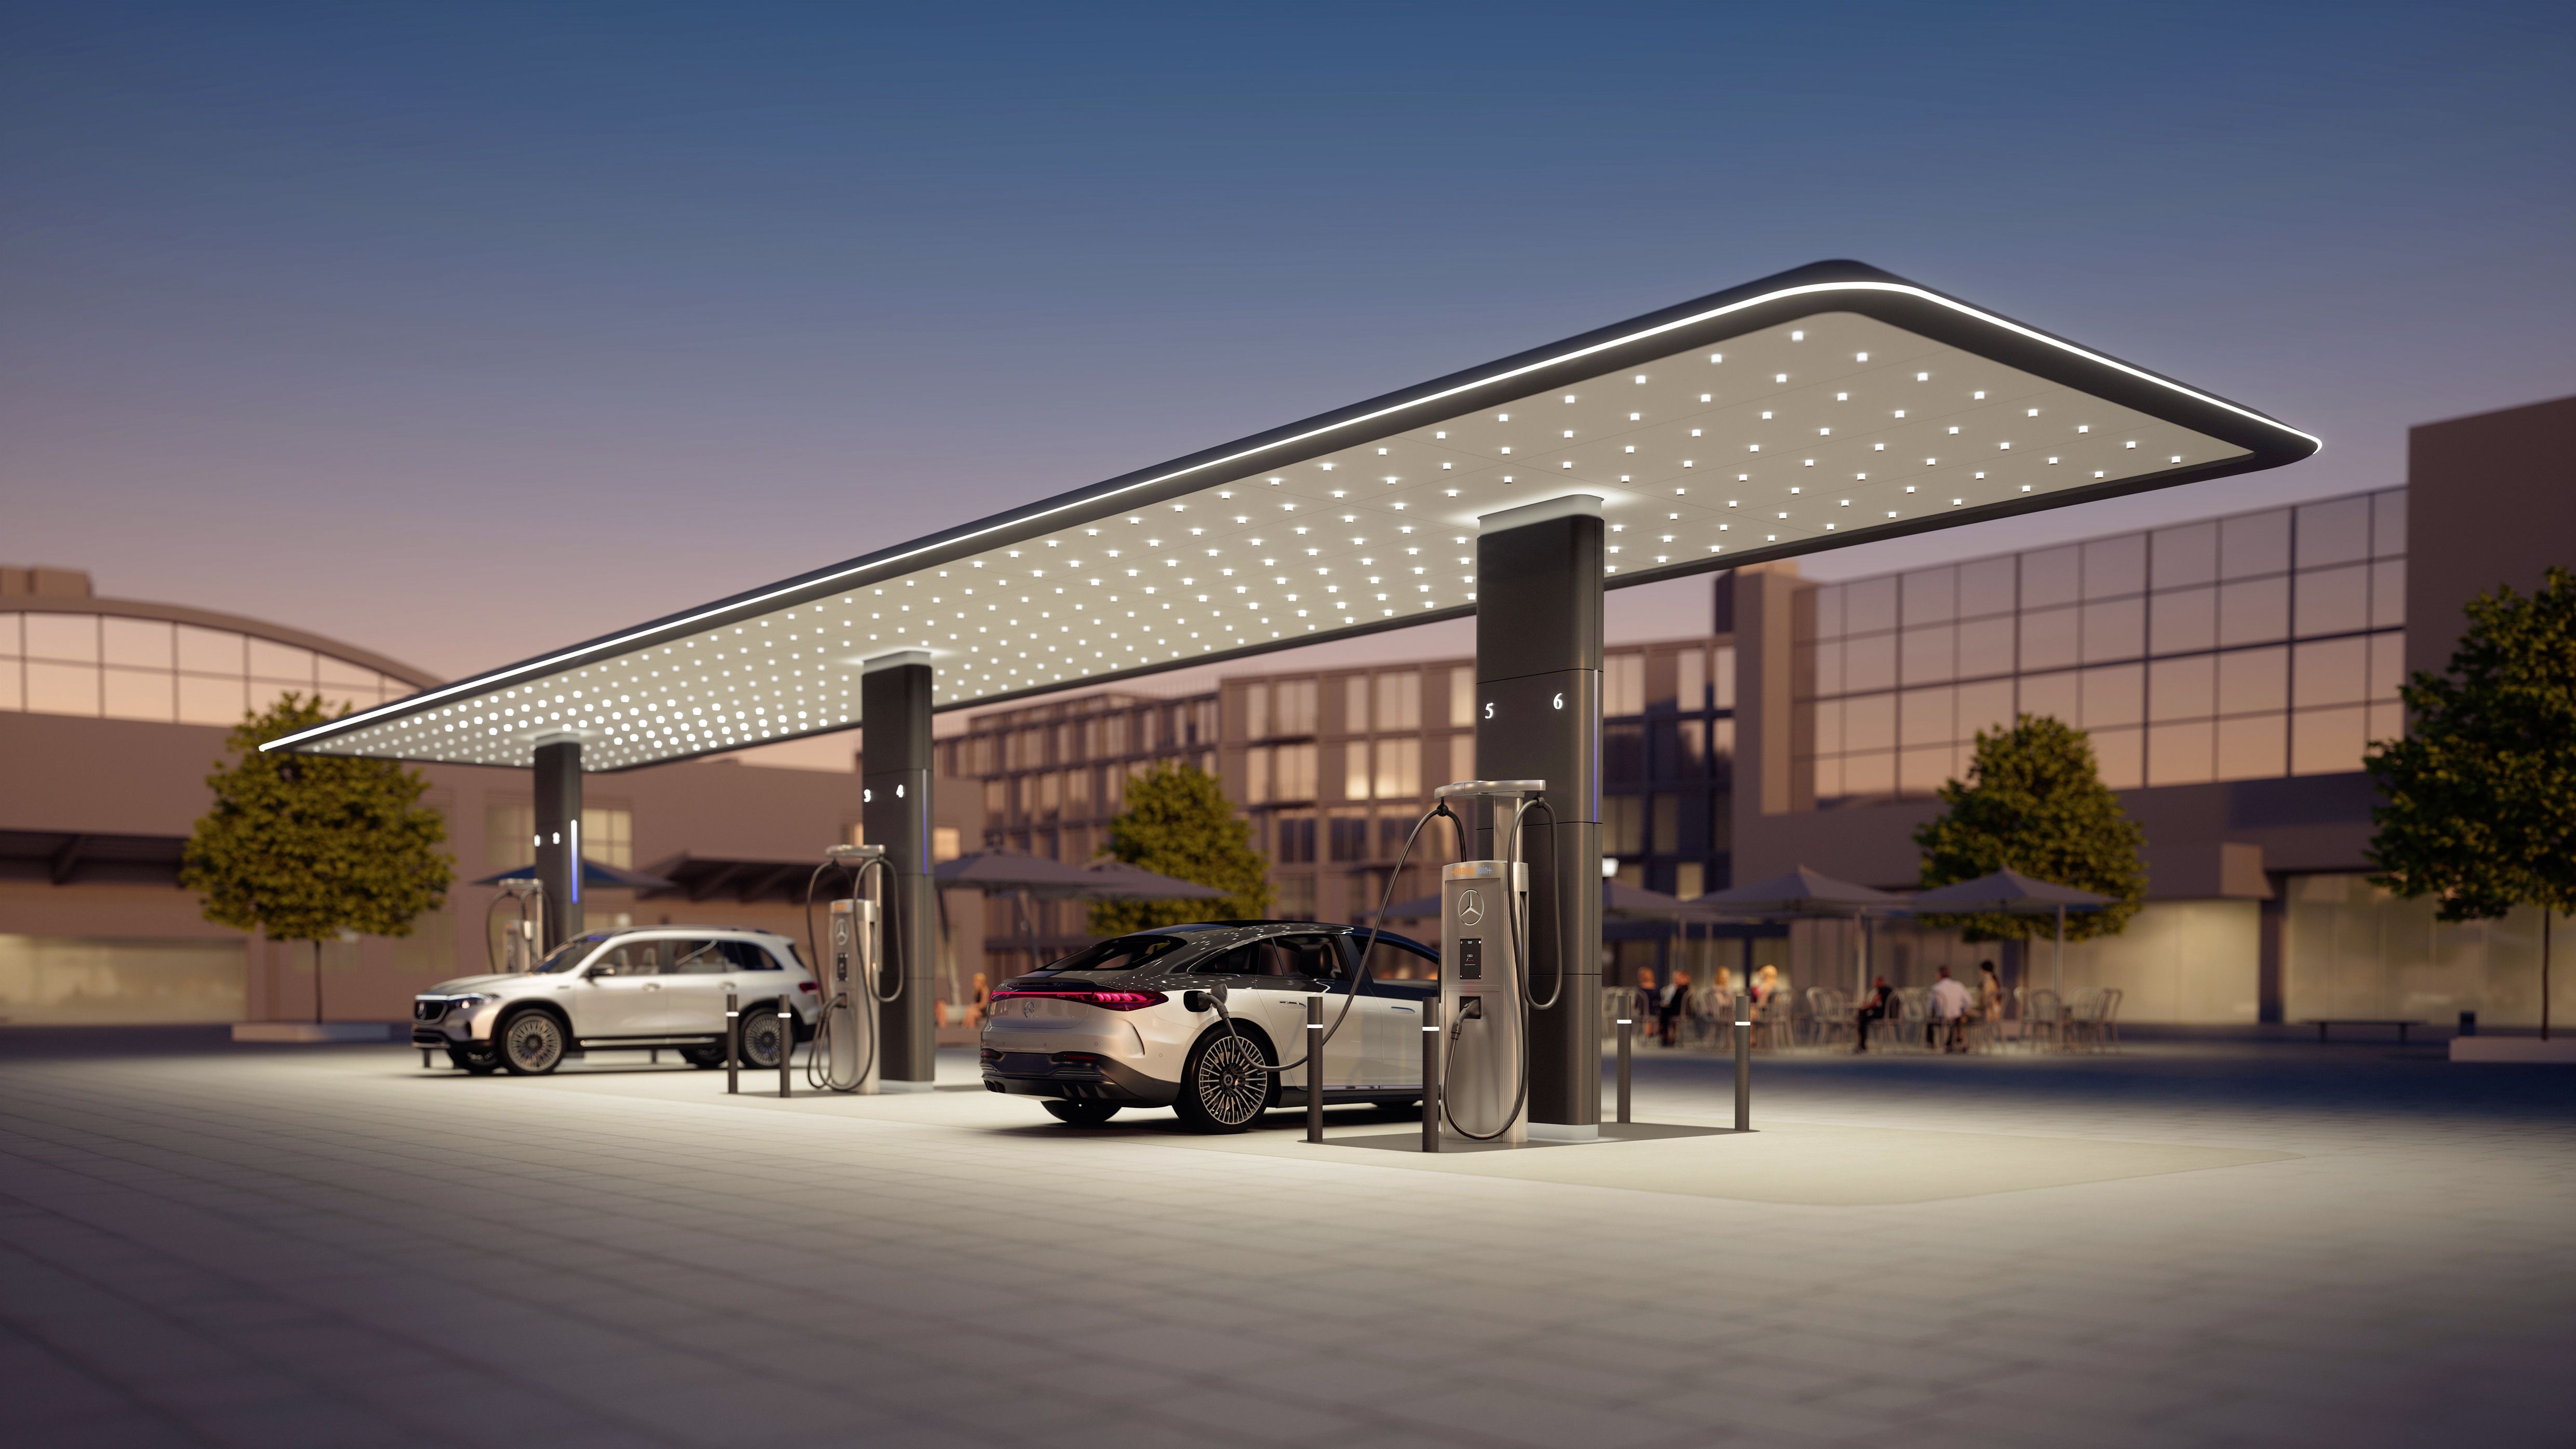 Revel aims to charge up NYC's EV infrastructure